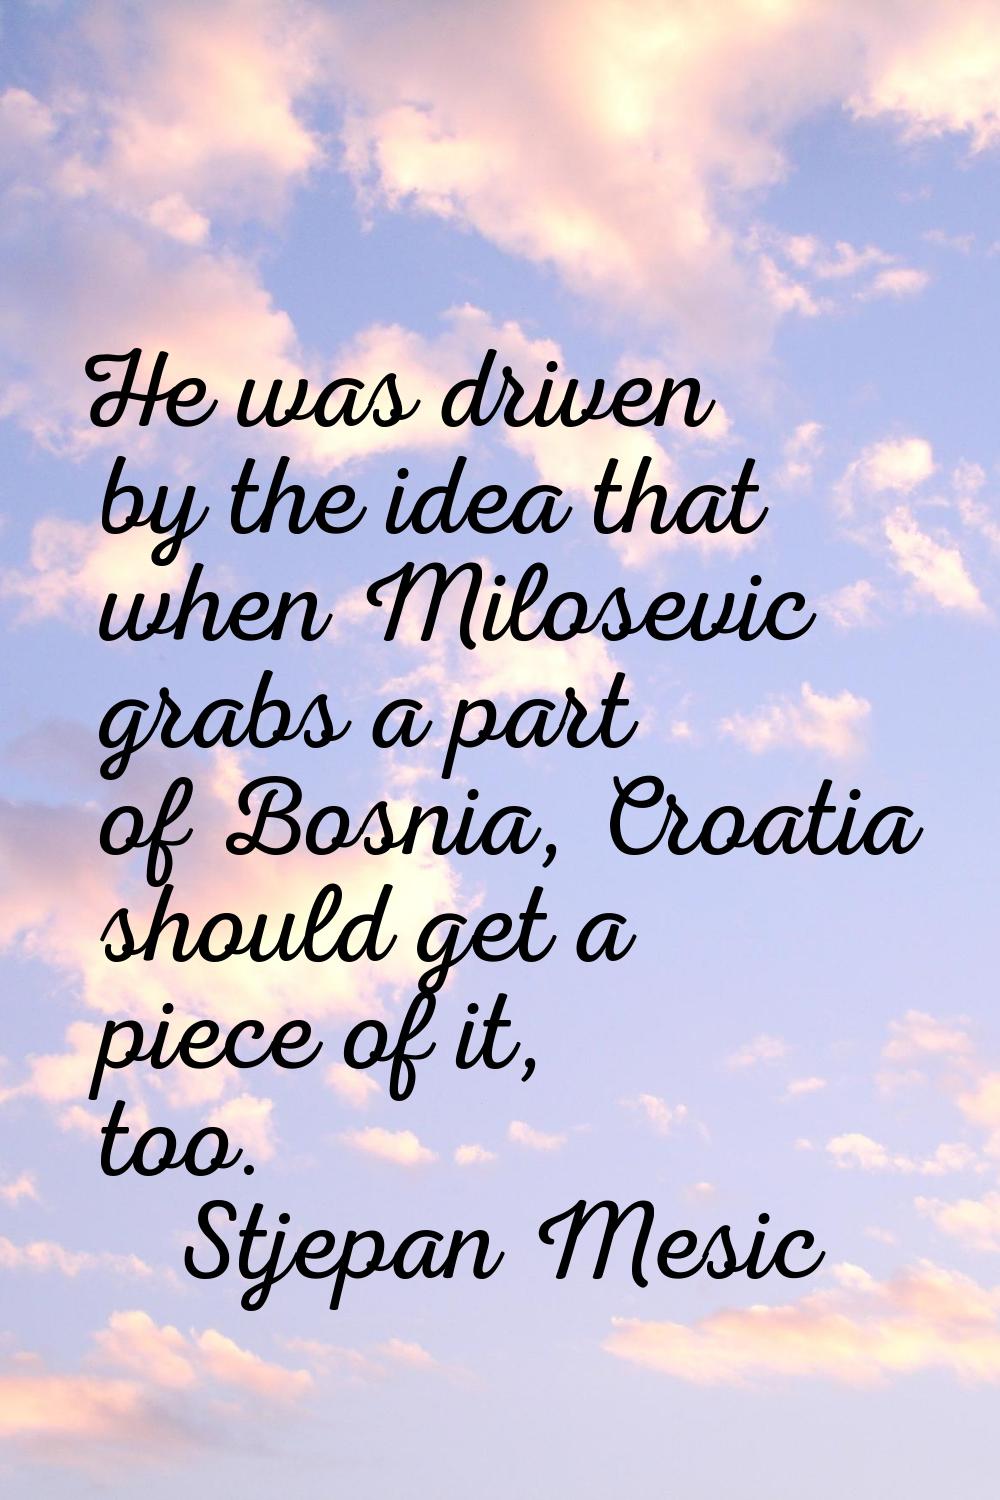 He was driven by the idea that when Milosevic grabs a part of Bosnia, Croatia should get a piece of